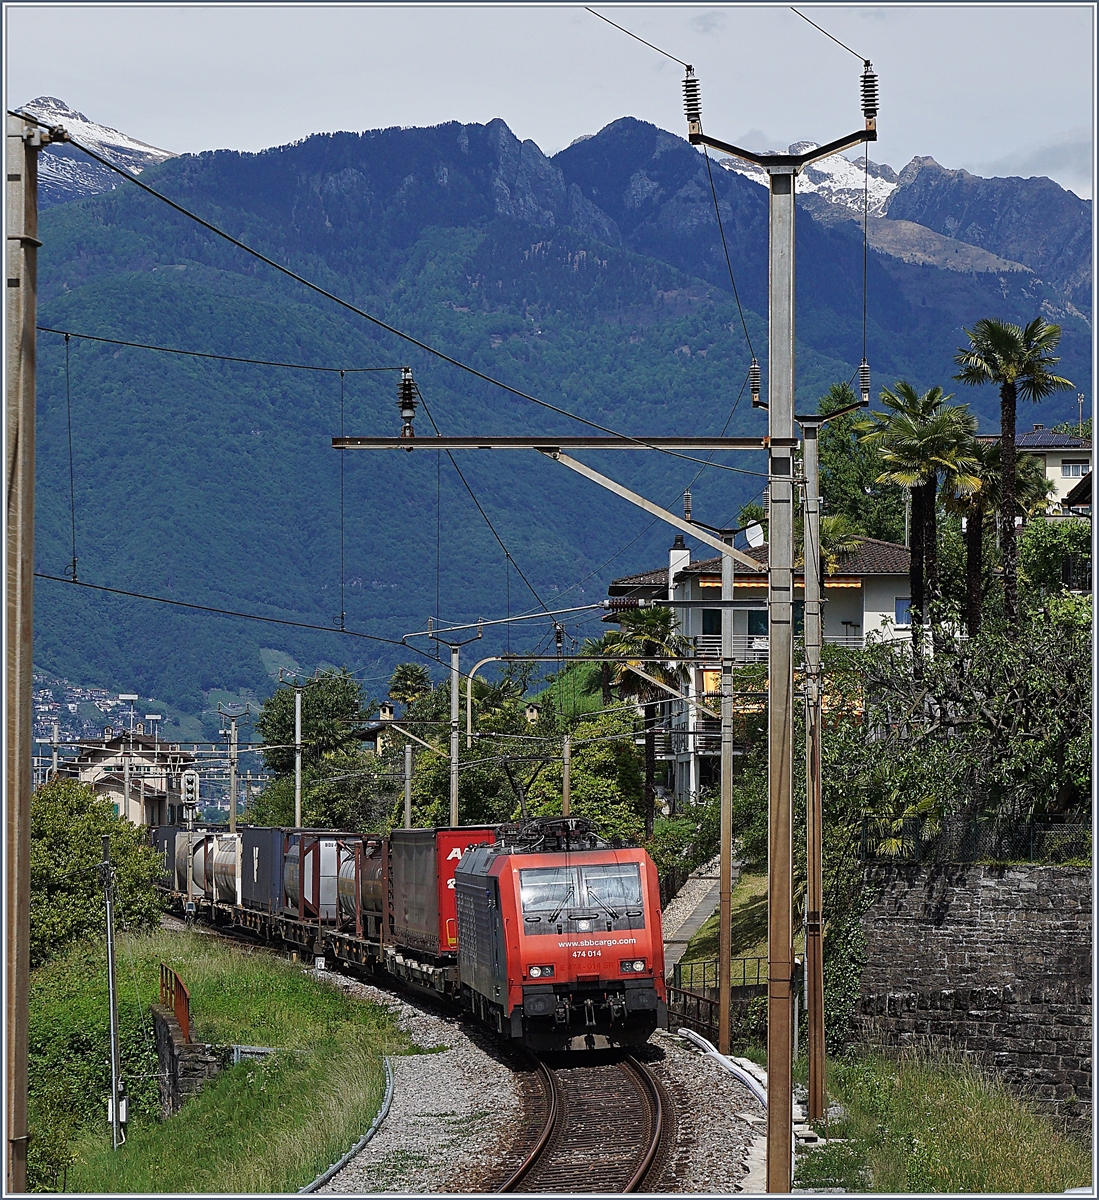 The SBB Re 474 014 with a Cargo train to Luino by San Nazarro.
20.05.2017